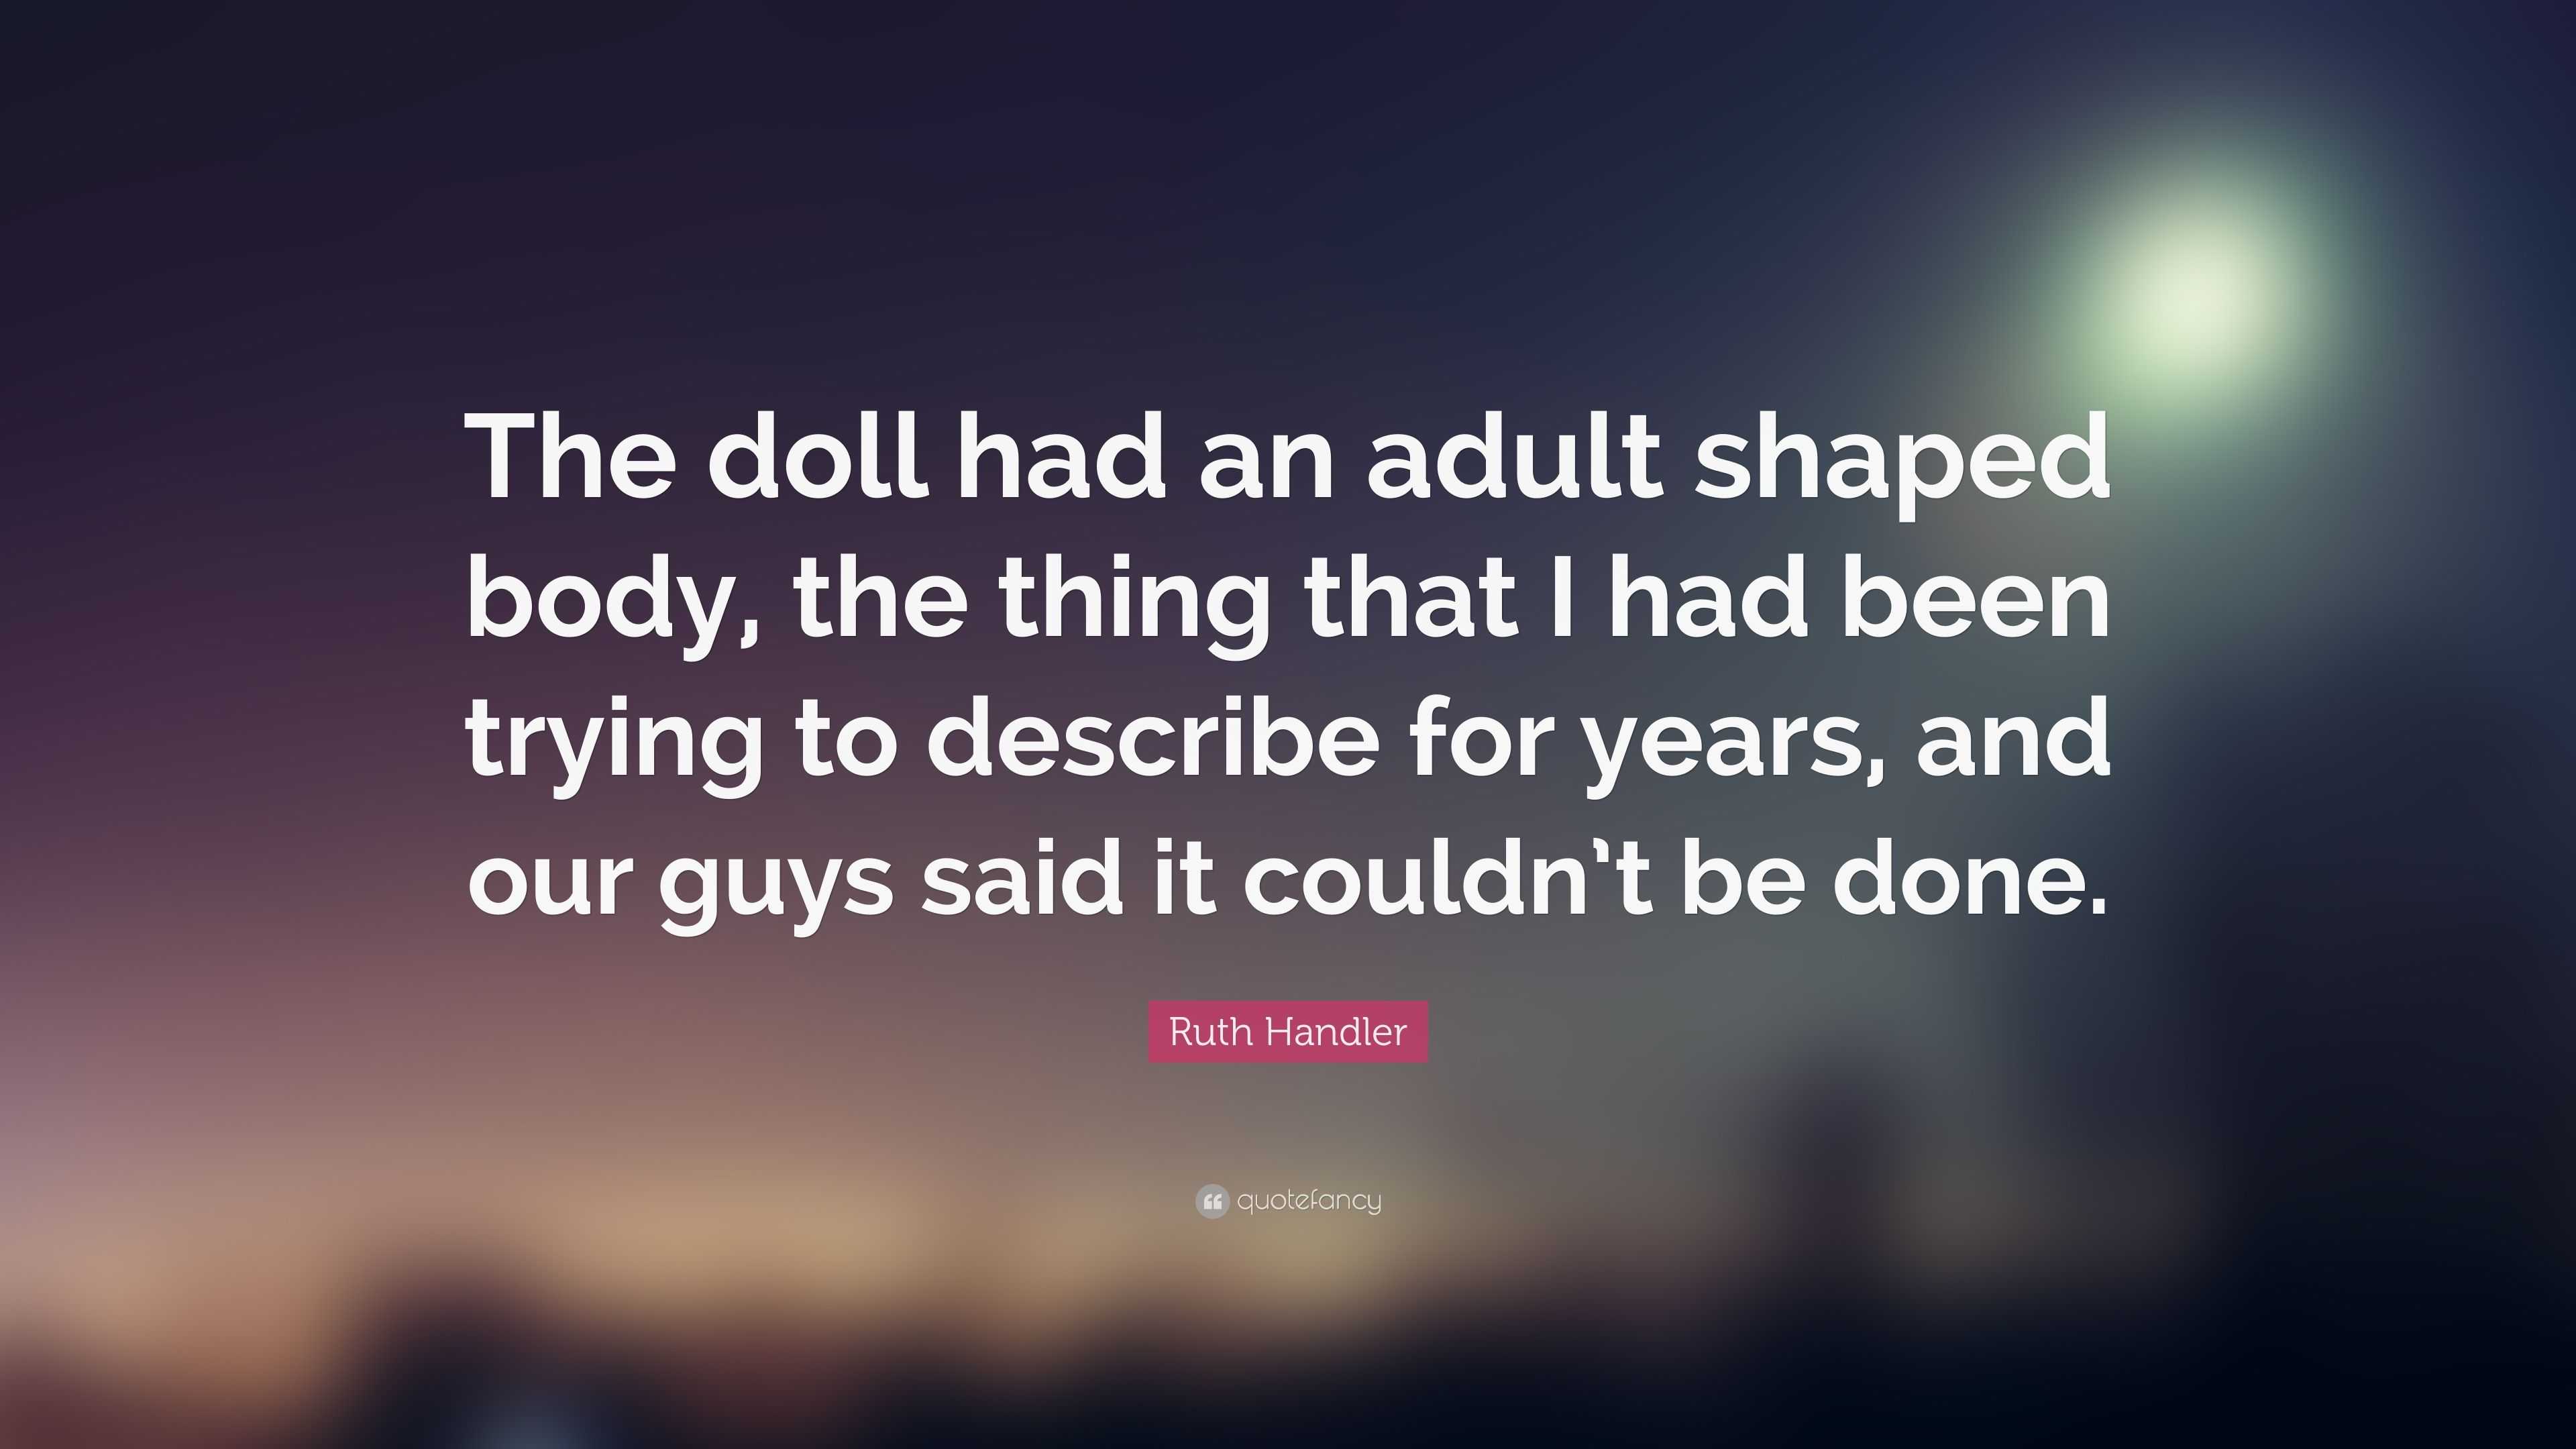 Ruth Handler Quote: “The doll had an adult shaped body, the thing that